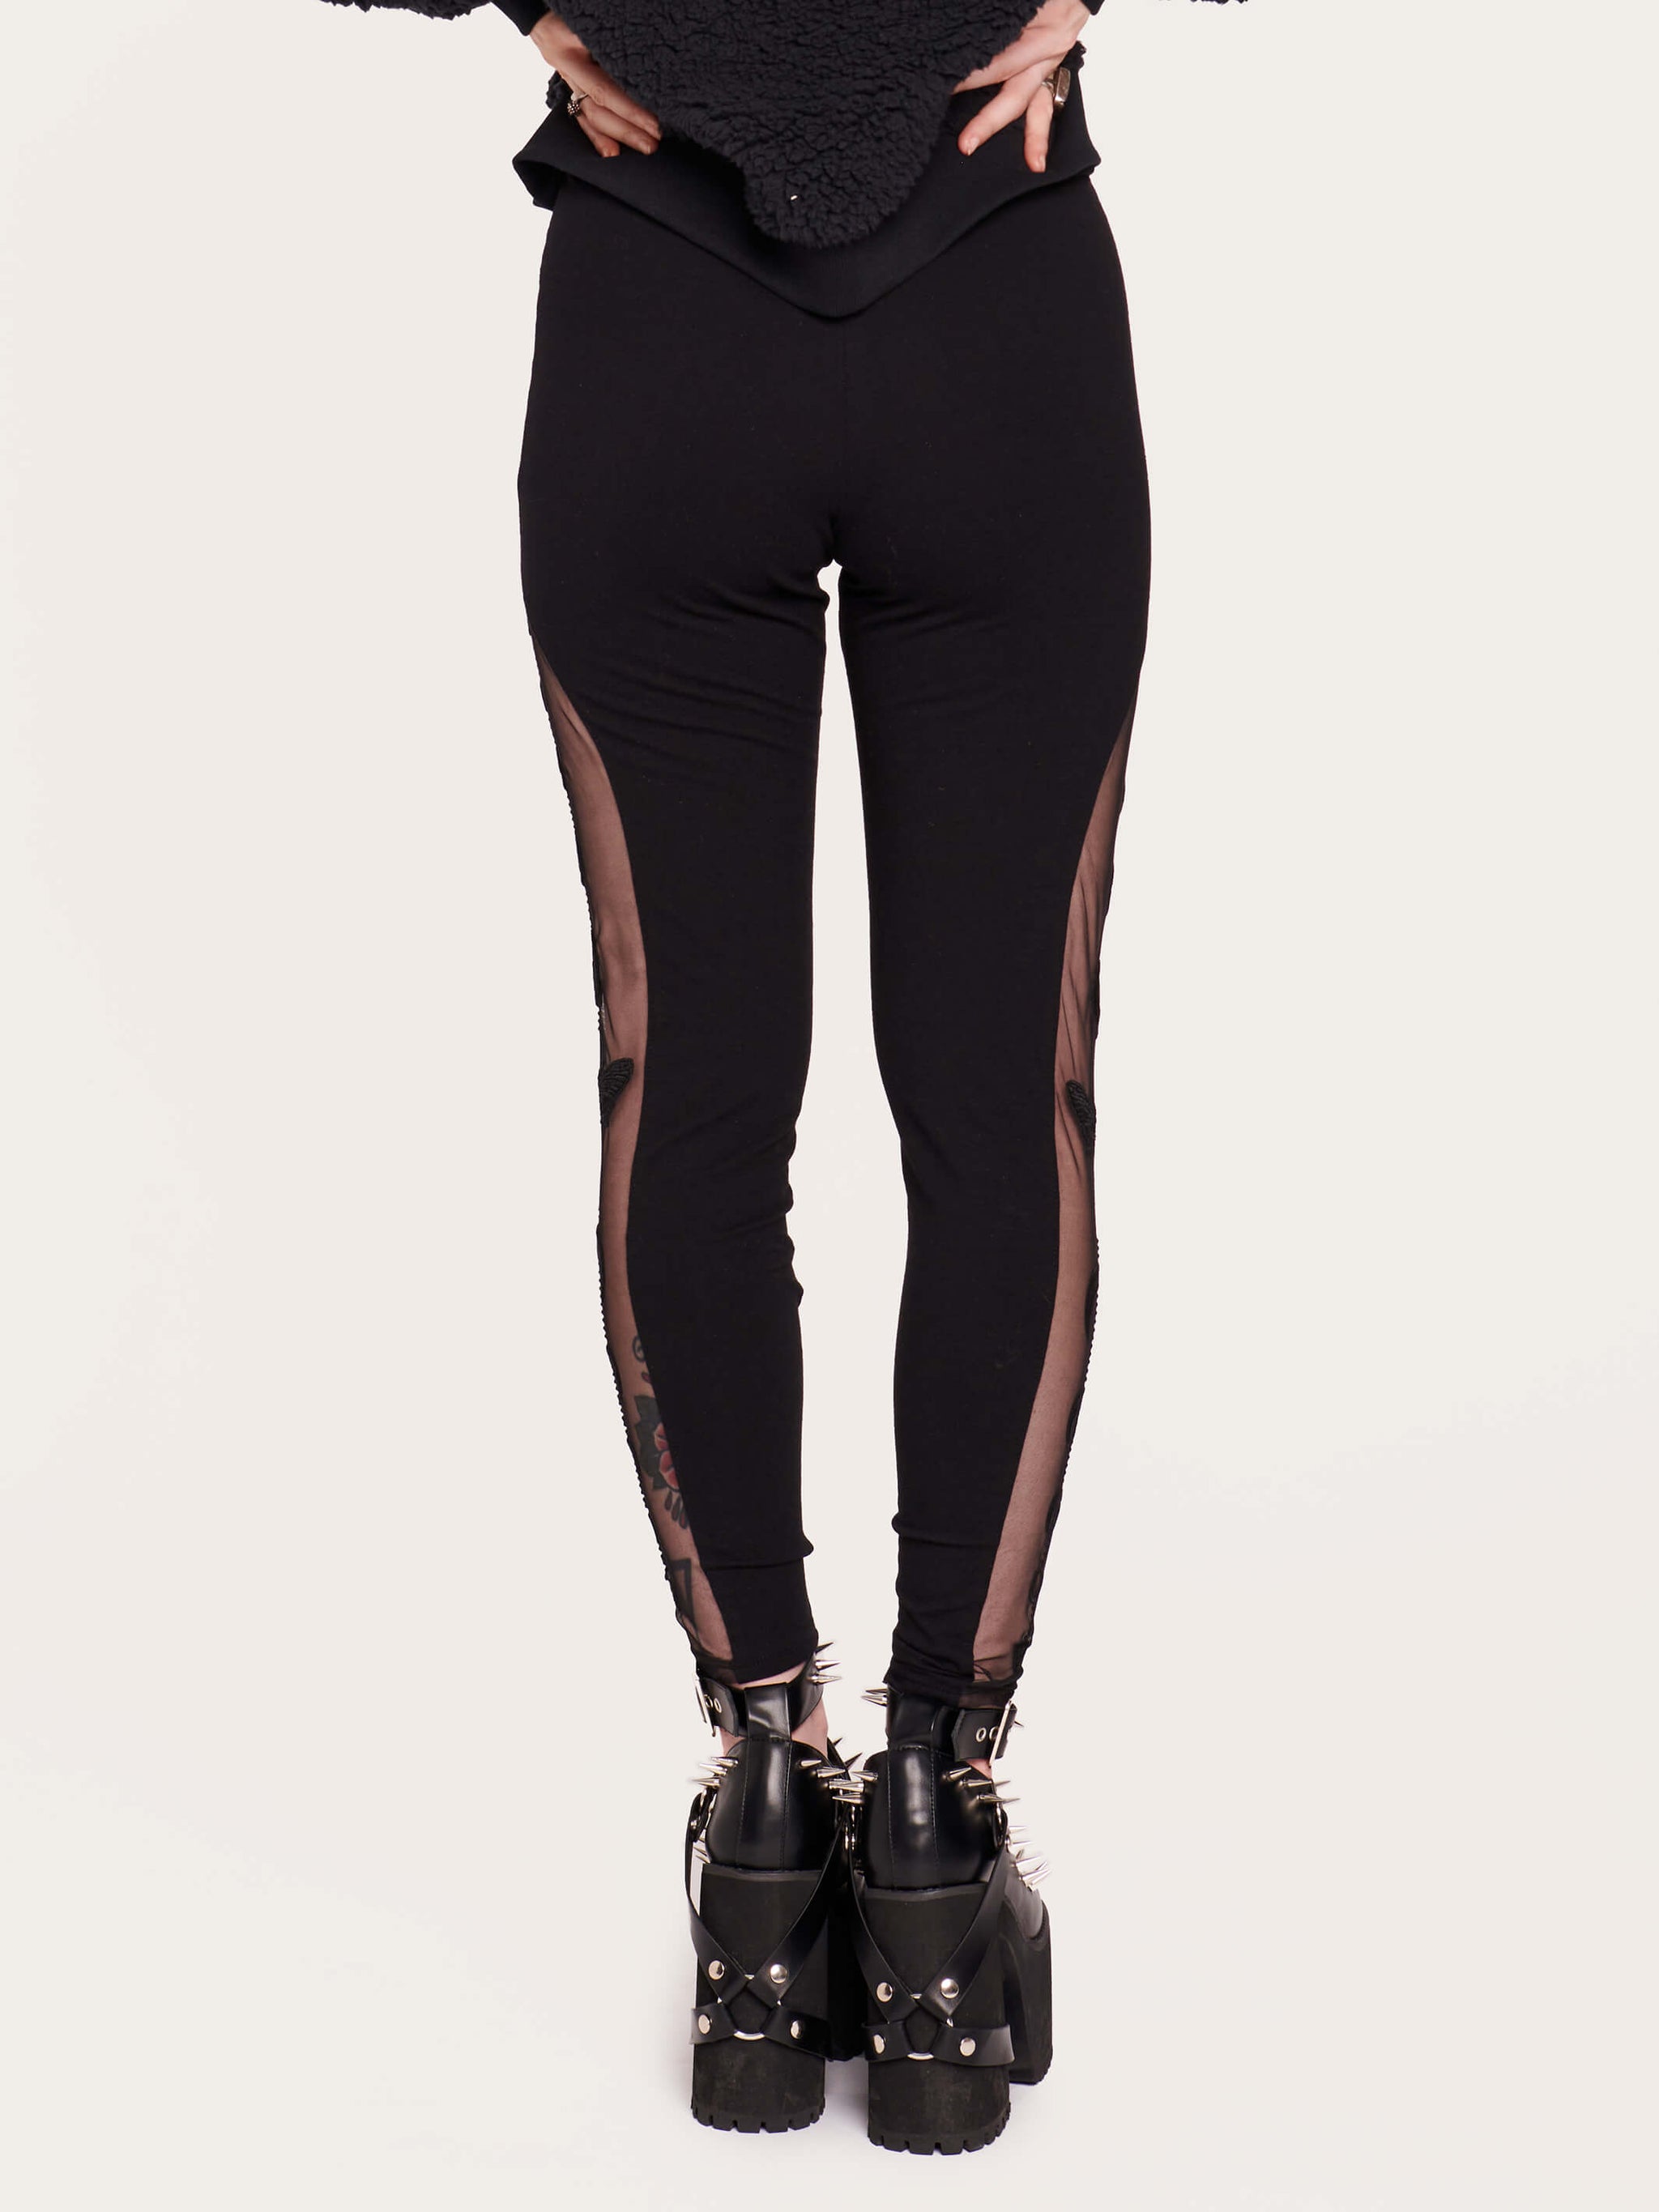 Embroidered moon phase leggings